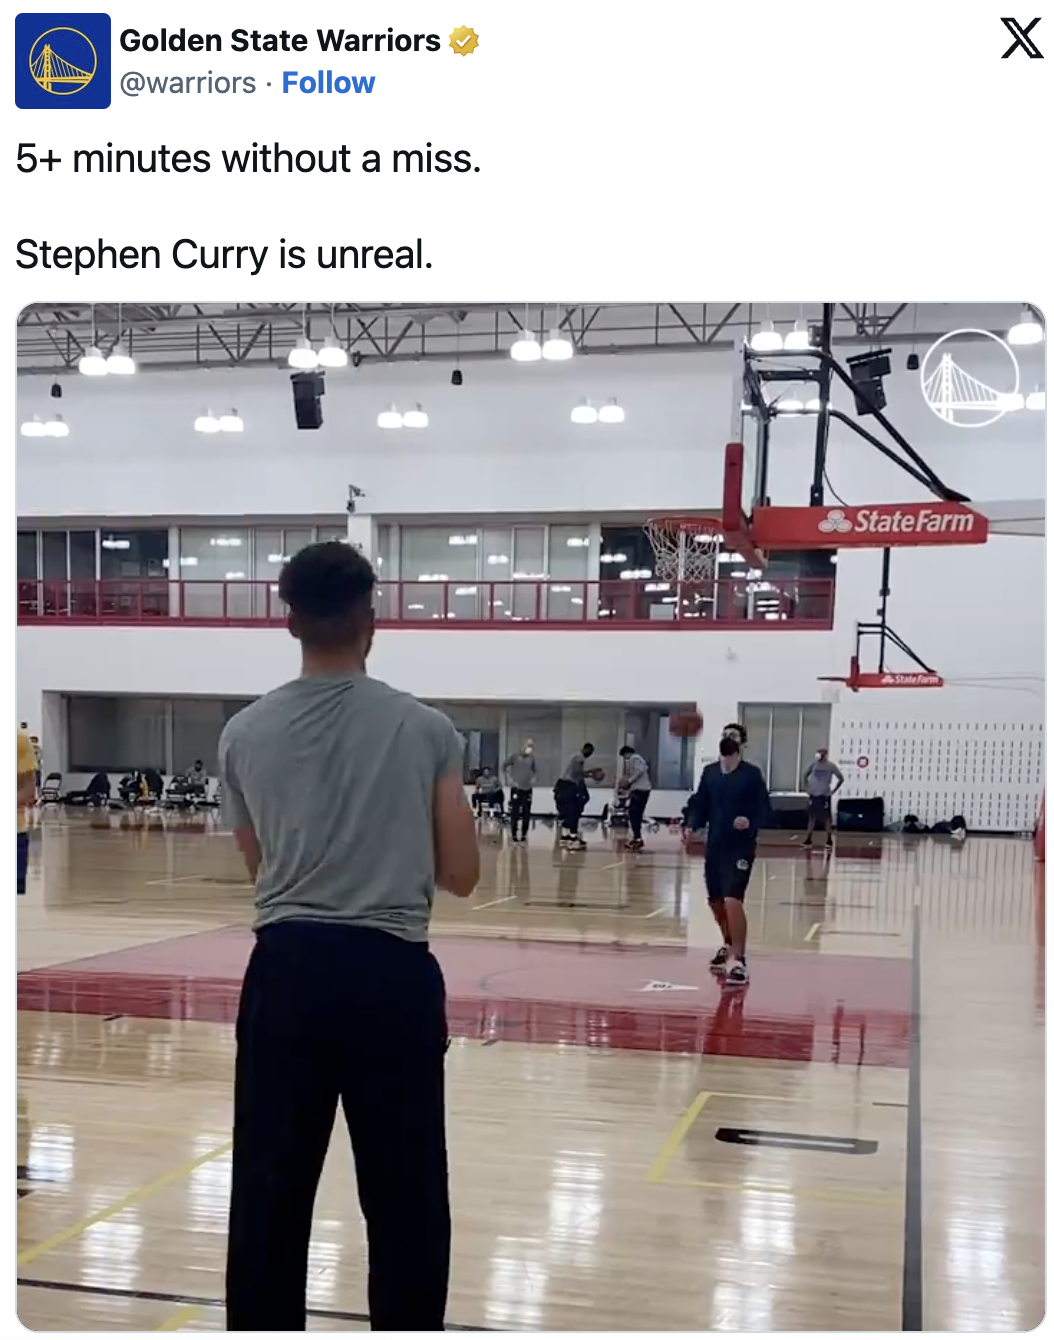 During practice, Steph Curry makes five 3-pointers in a row, which is "unreal."